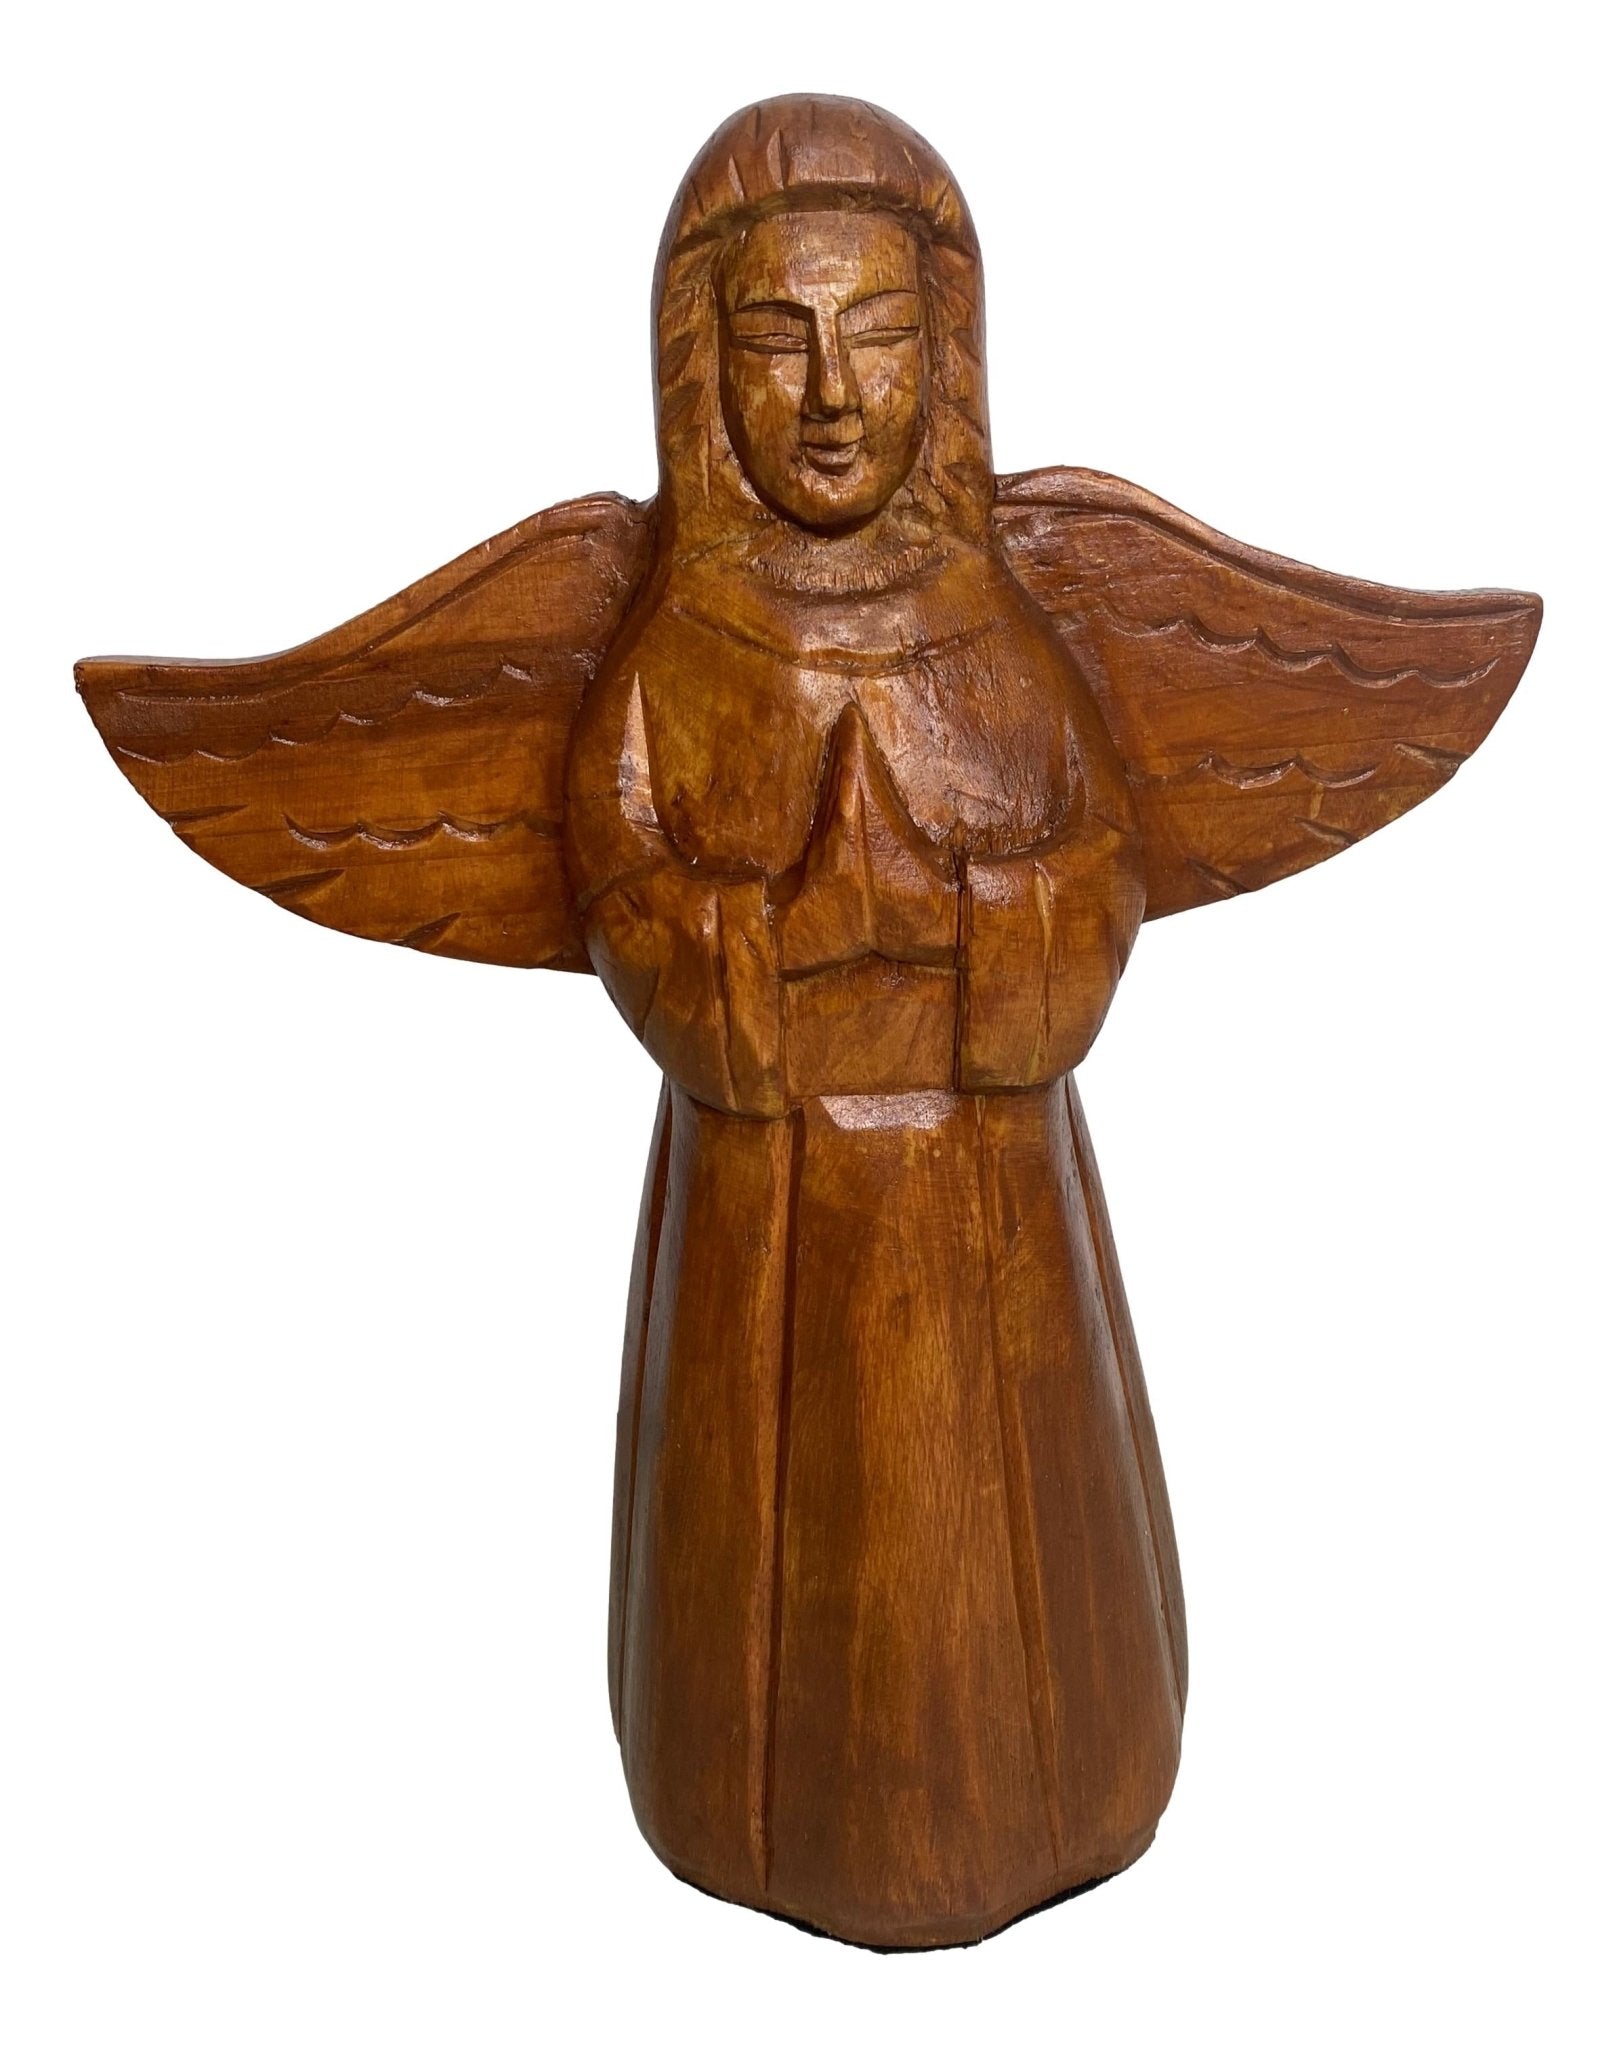 Candle Holder Statue Carved Wood Praying Angel 8 L x 4 W x 10 H Inches - Ysleta Mission Gift Shop- VOTED 2022 El Paso's Best Gift Shop